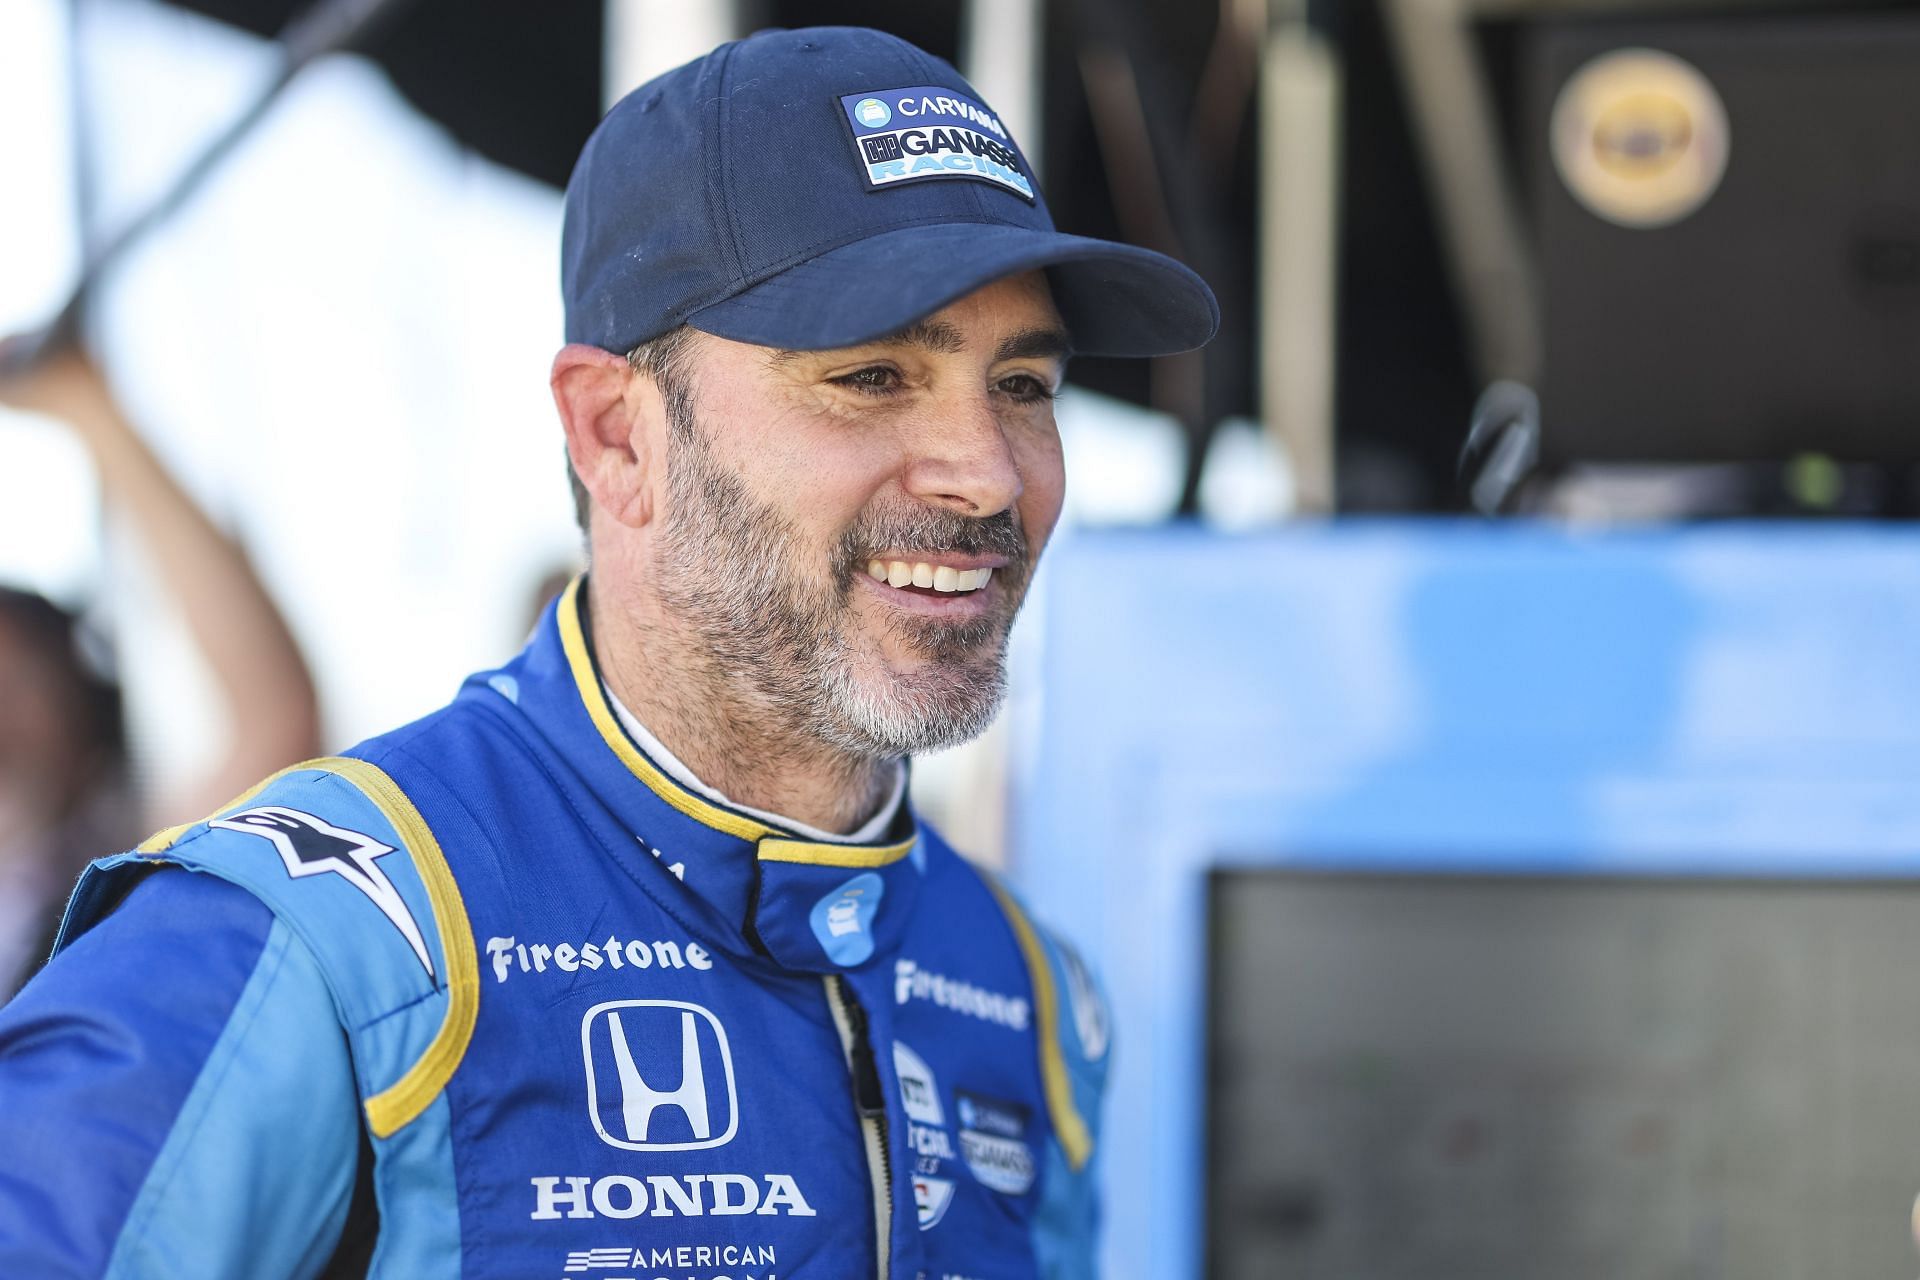 Jimmie Johnson during practice for the 2022 NTT IndyCar Series XPEL 375 at Texas Motor Speedway in Fort Worth, Texas. (Photo by James Gilbert/Getty Images)